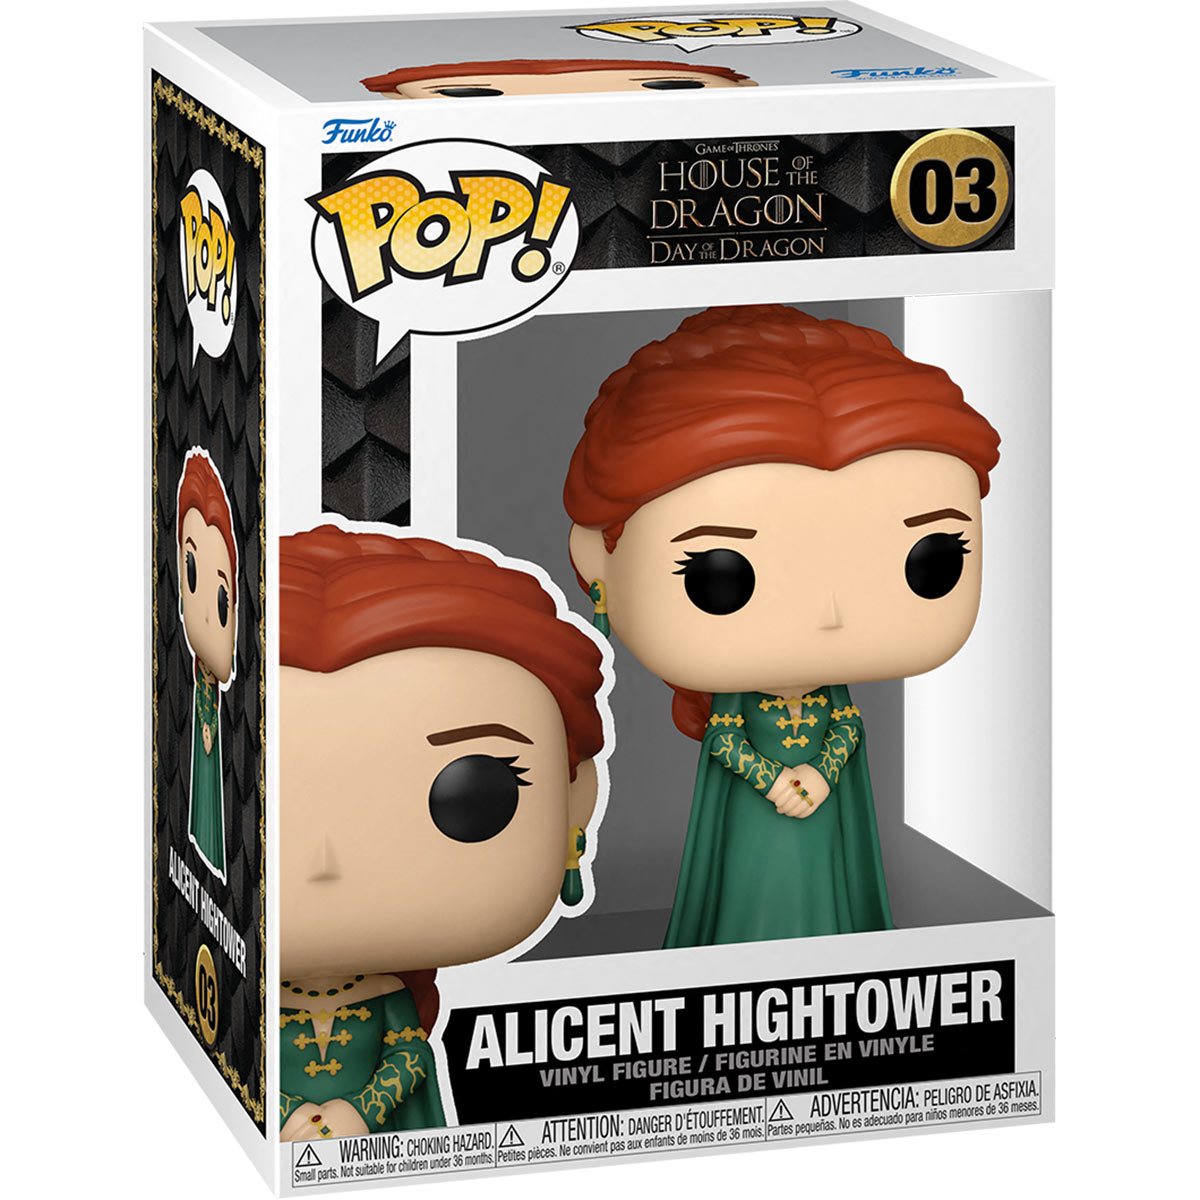 House of the Dragon Alicent Hightower Vinyl Figure By Funko Pop!